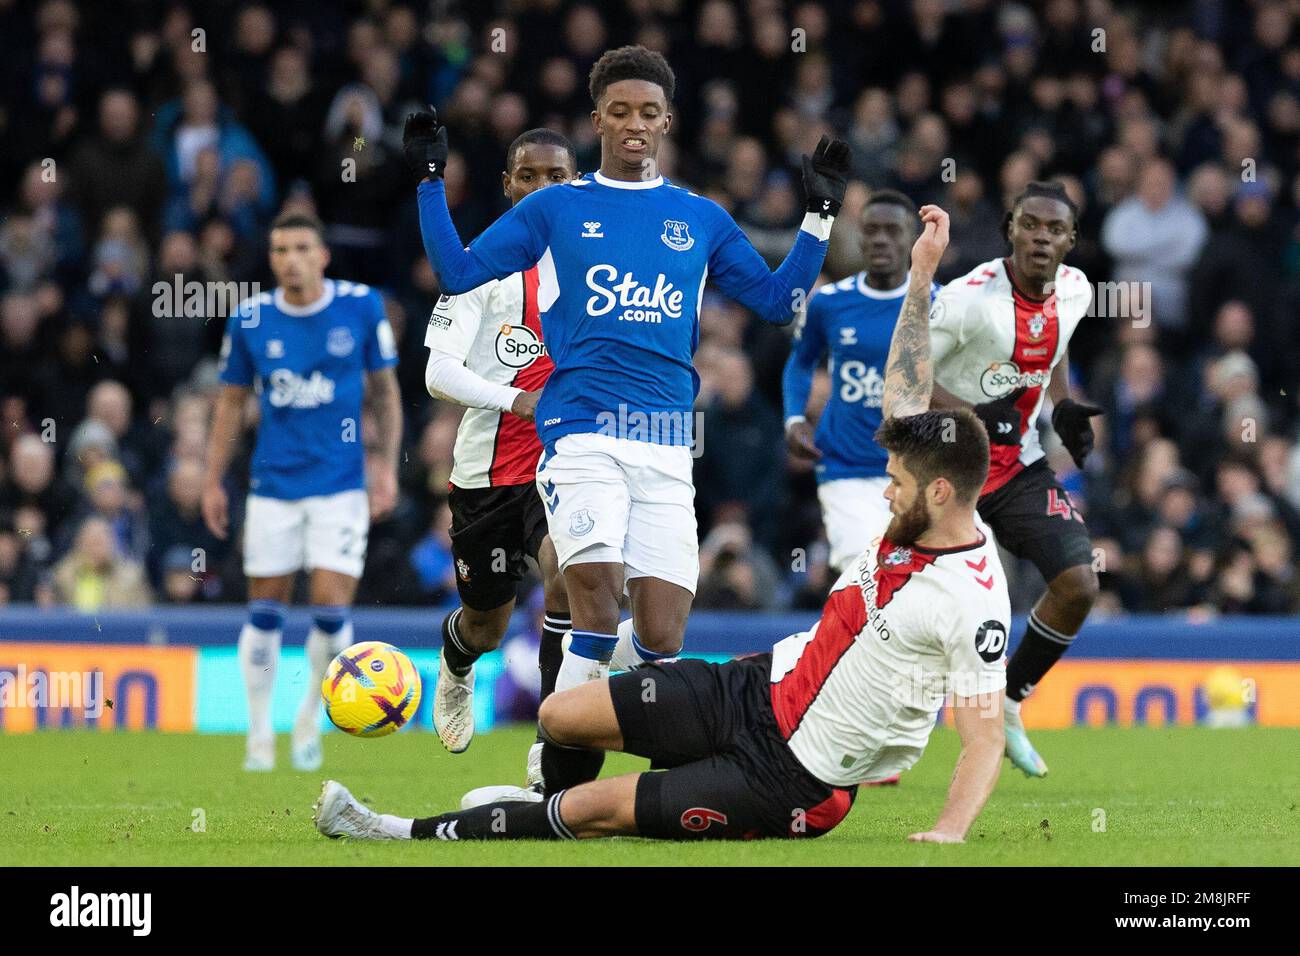 Duje Caleta-Car #6 of Southampton challenges Demarai Gray #11 of Everton during the Premier League match Everton vs Southampton at Goodison Park, Liverpool, United Kingdom, 14th January 2023  (Photo by Phil Bryan/News Images) Stock Photo